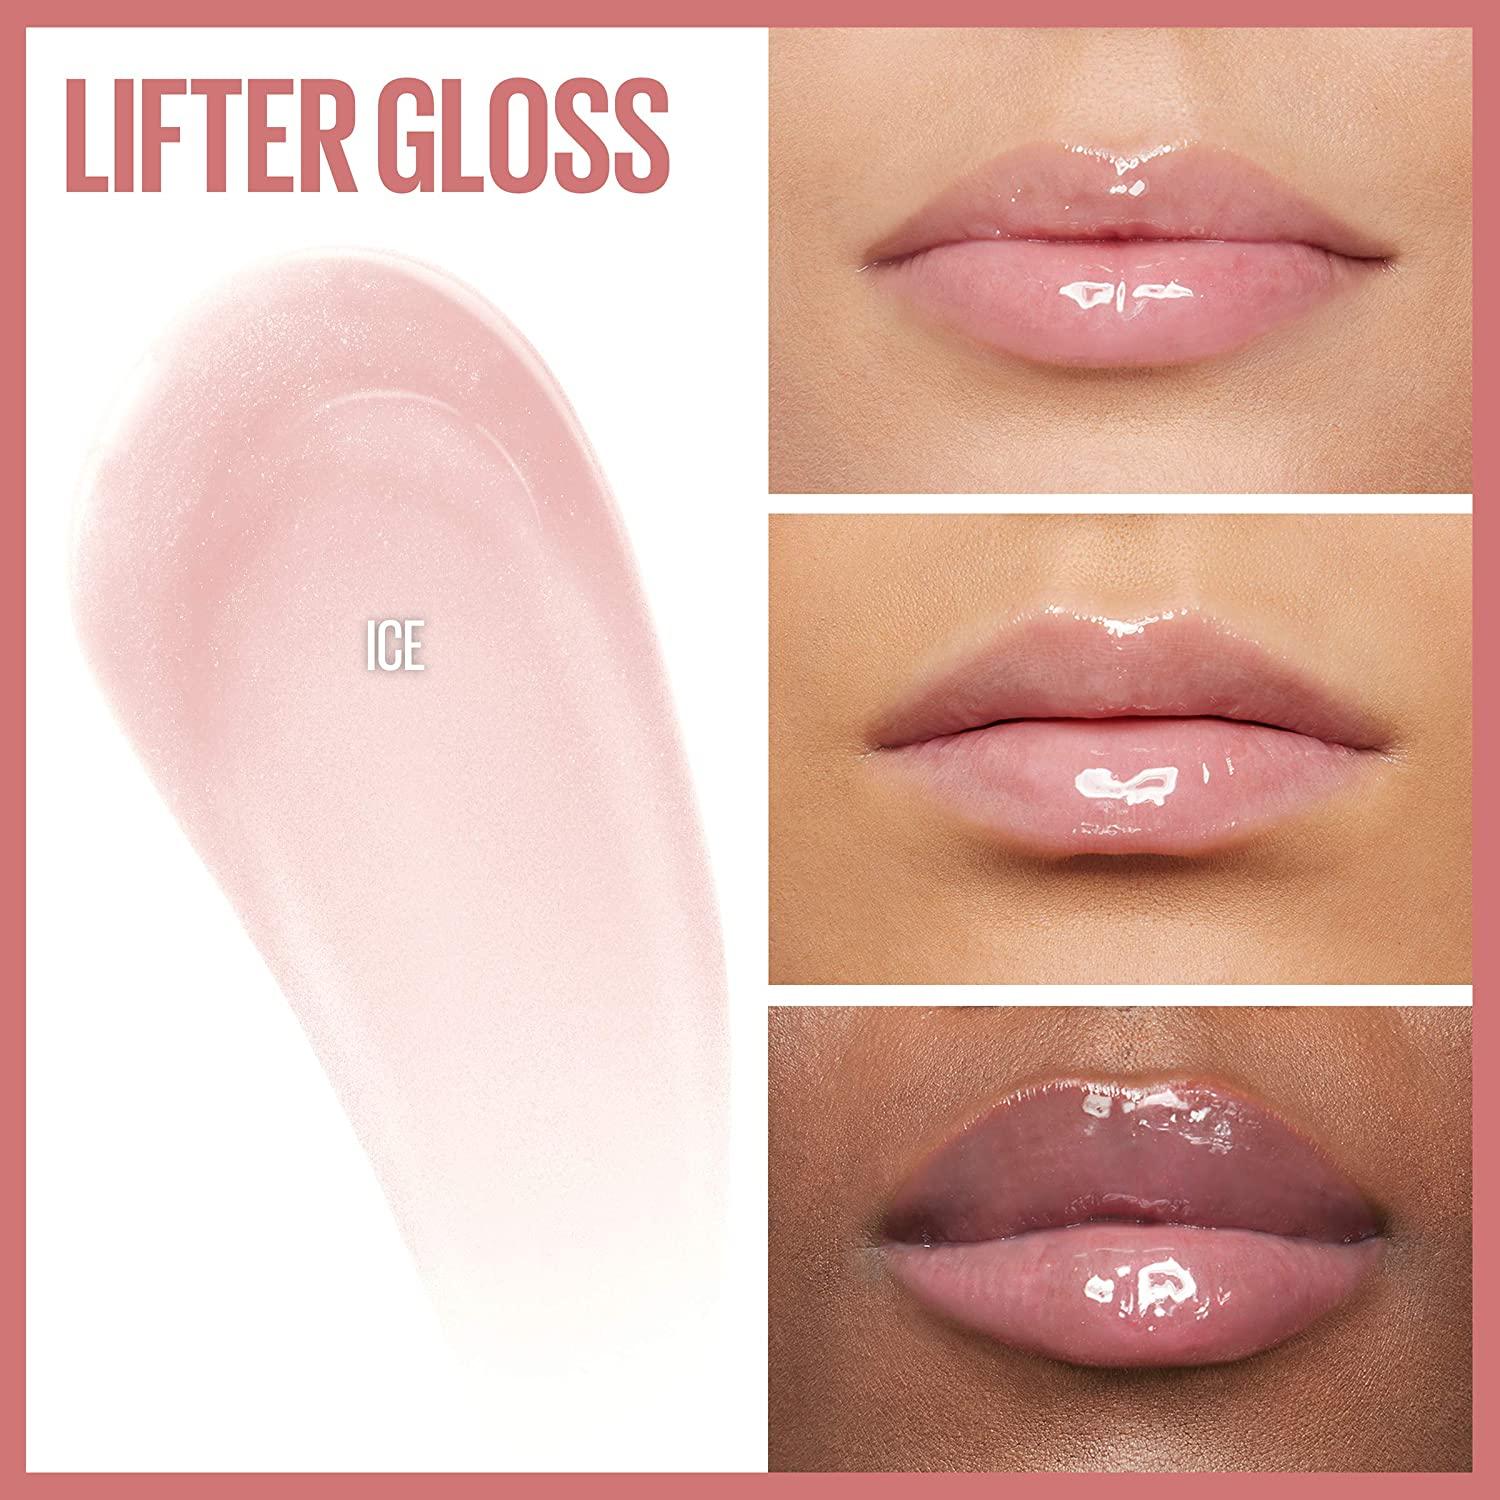 Maybelline Lifter Gloss, Hydrating Lip Gloss with Hyaluronic Acid, High  Shine for Fuller Looking Lips, XL Wand, Ice, Pink Neutral, 0.18 Ounce